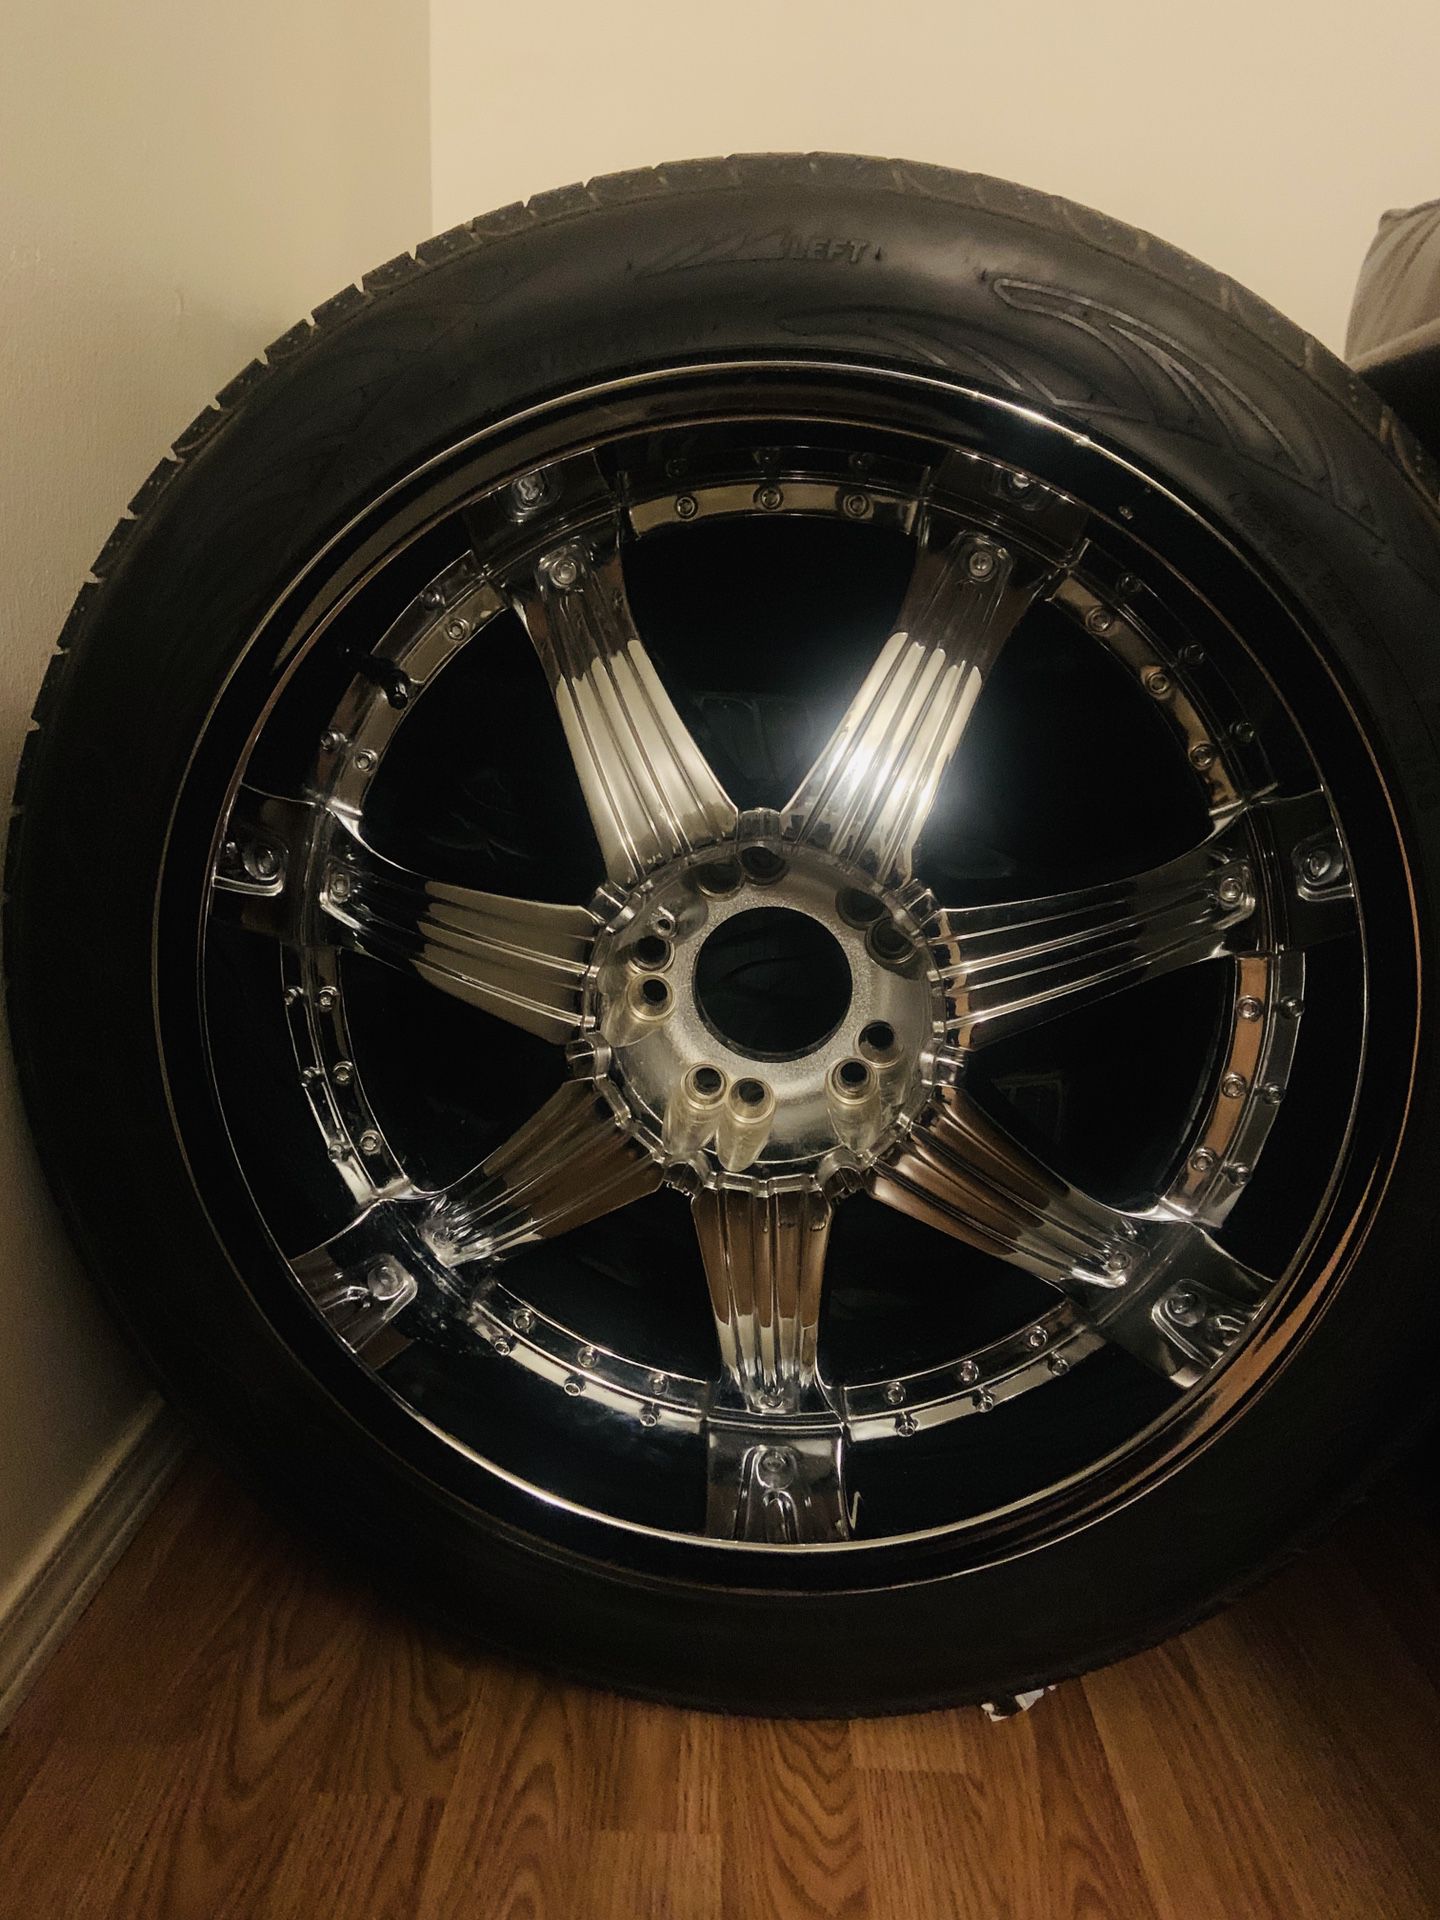 Tires with rims